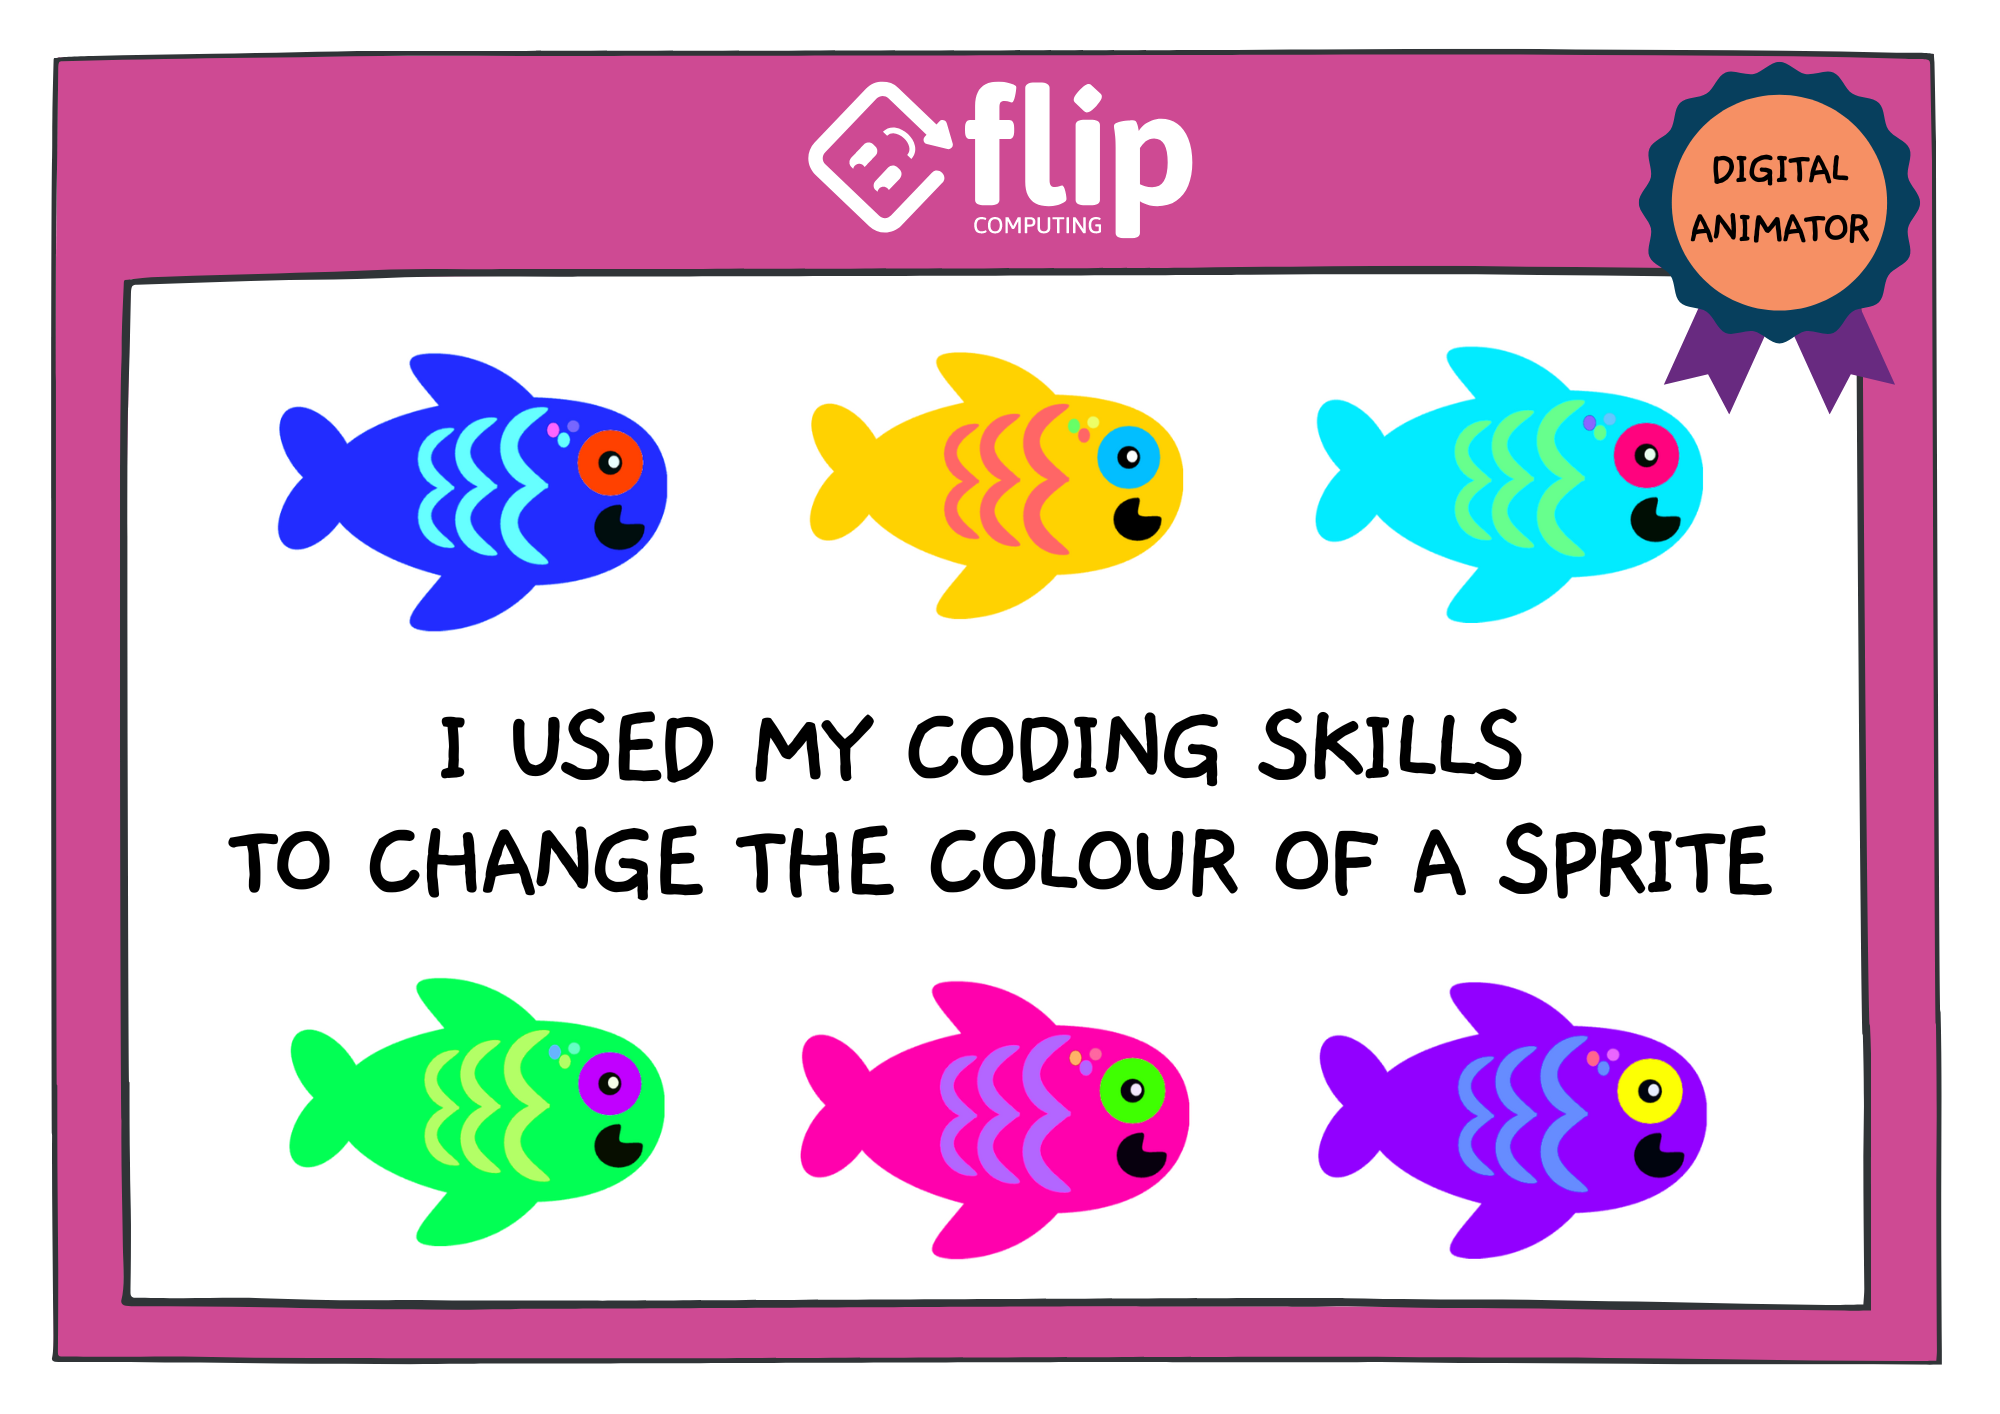 A graphic of a certificate. It has a pink border with the Flip Computing logo at the top. There is a rosette with the words 'Digital Animator'. The text on the certificate reads 'I used my coding skills to change the colour of a sprite'. There are cartoon fish on the certificate, each fish is in a different colour.